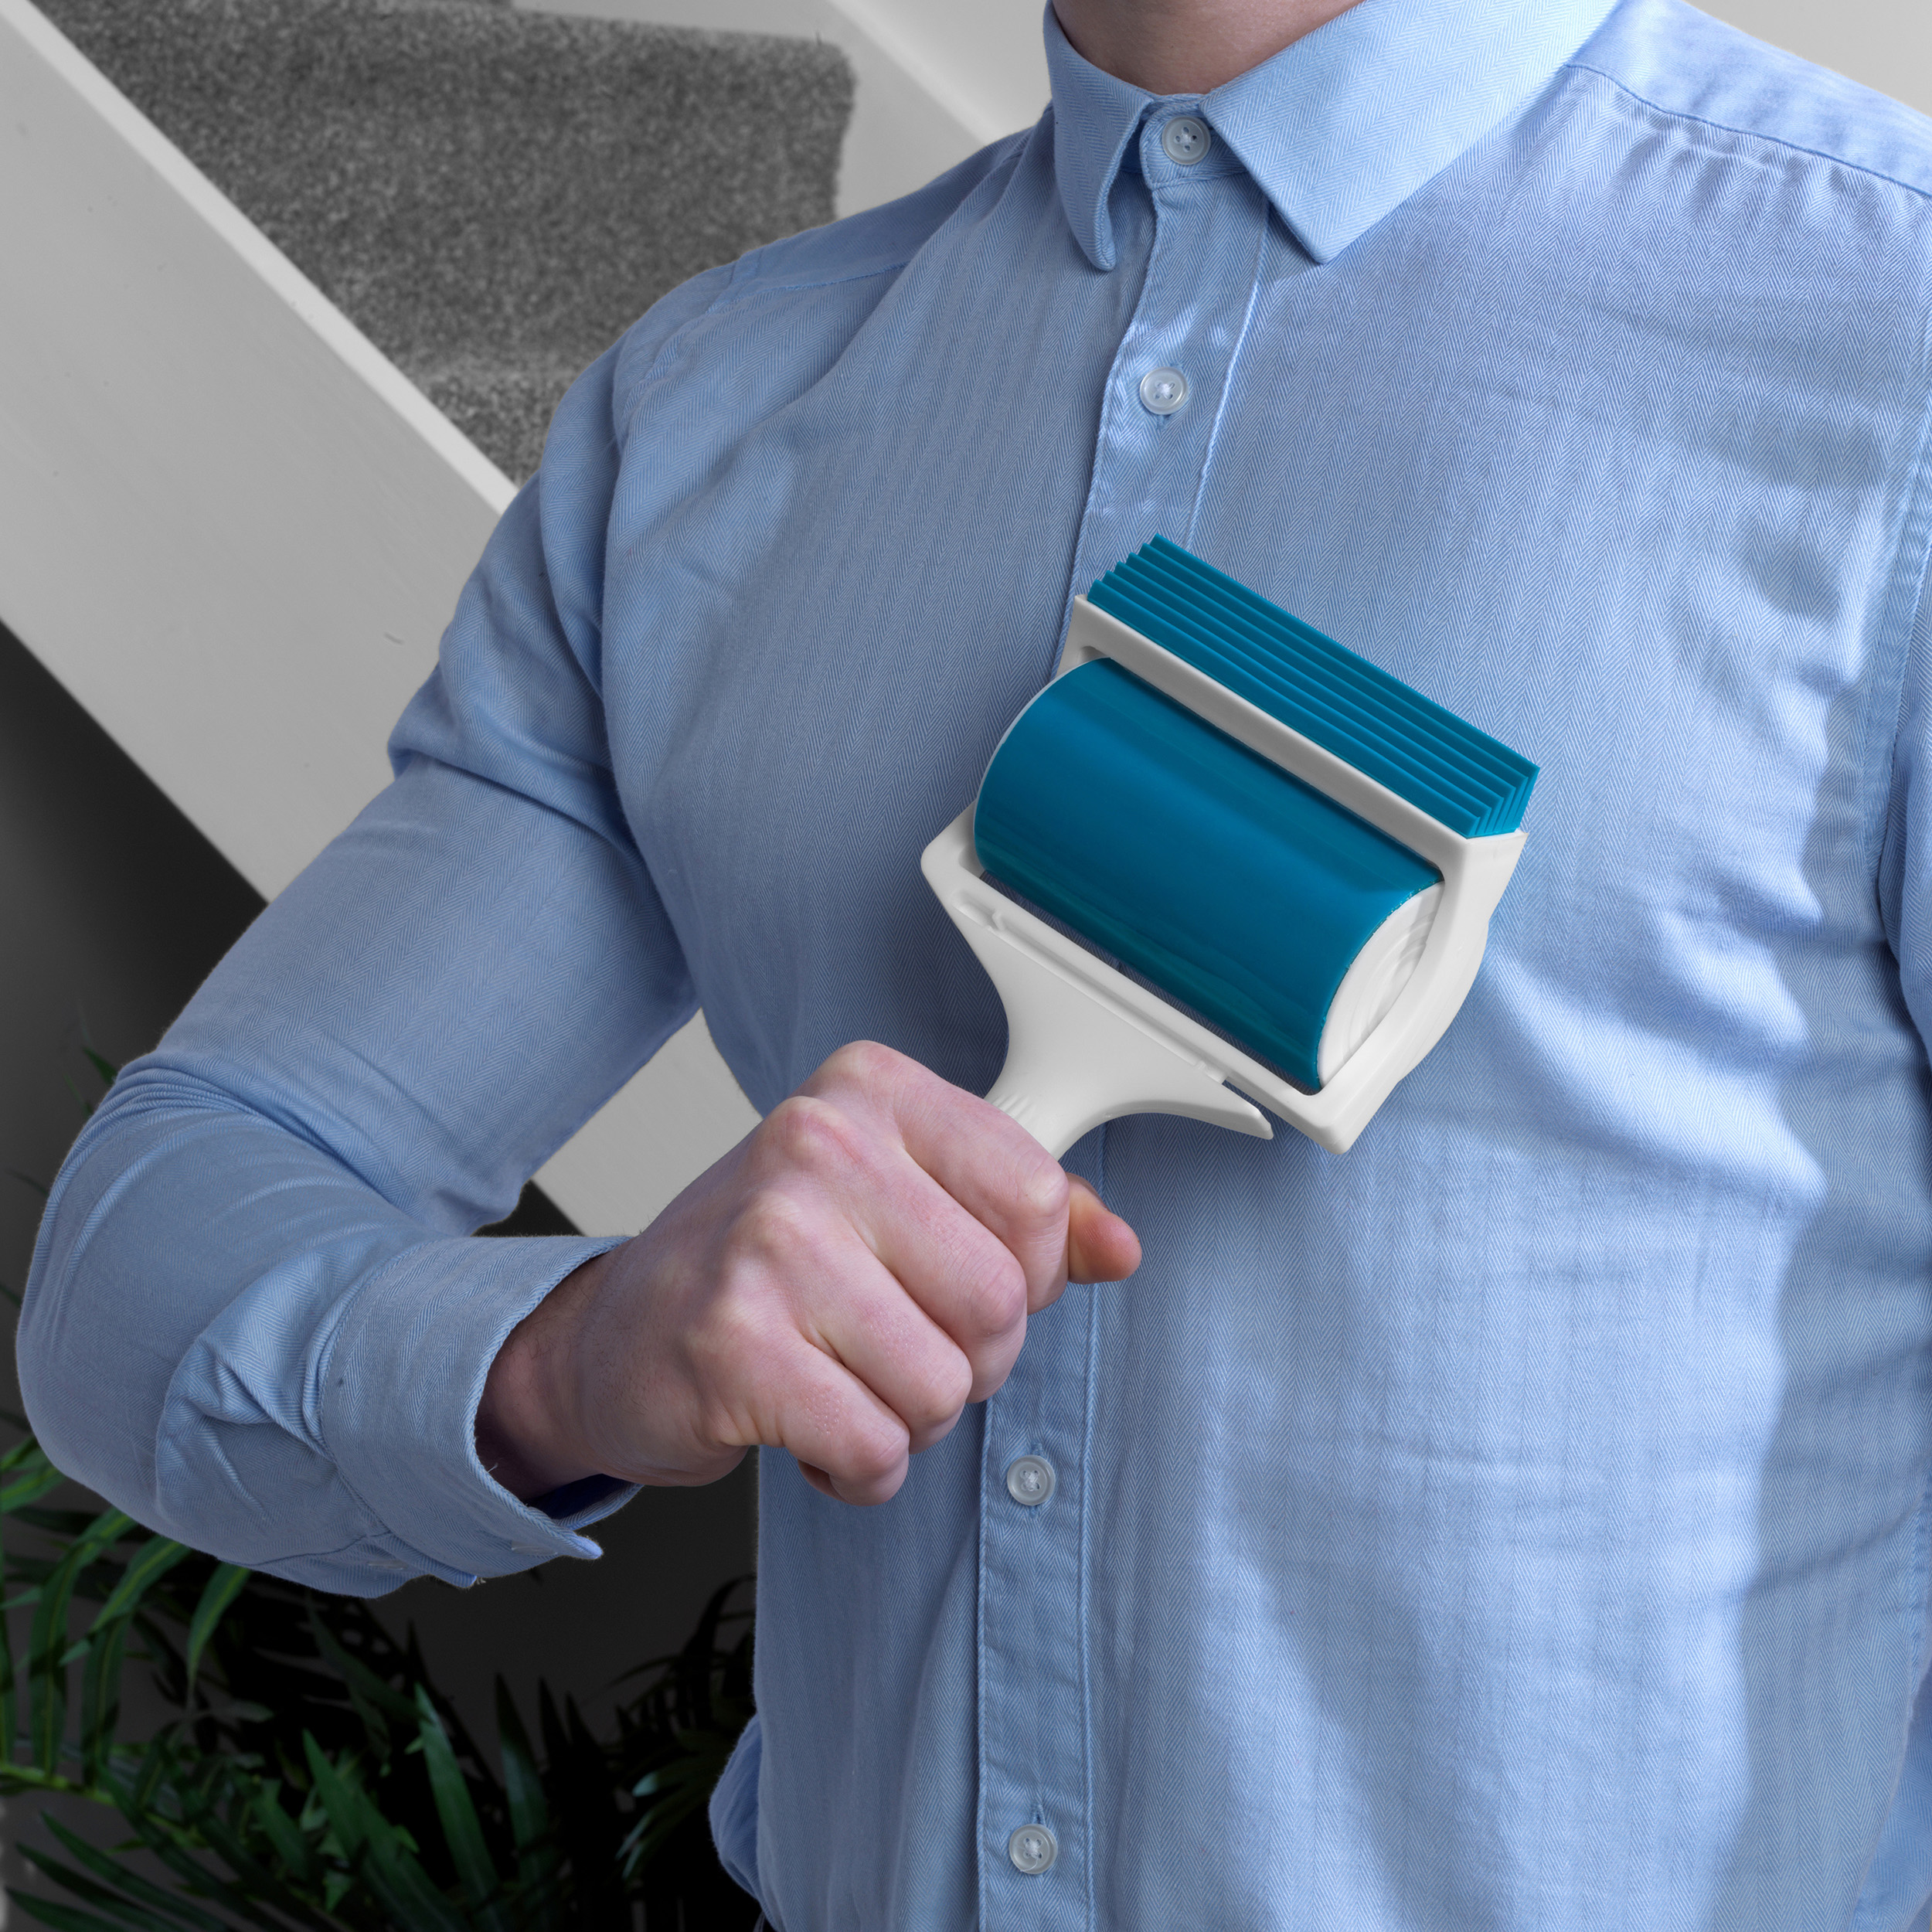 A Beldray Pet Plus Gel Lint Roller being used on a mans shirt